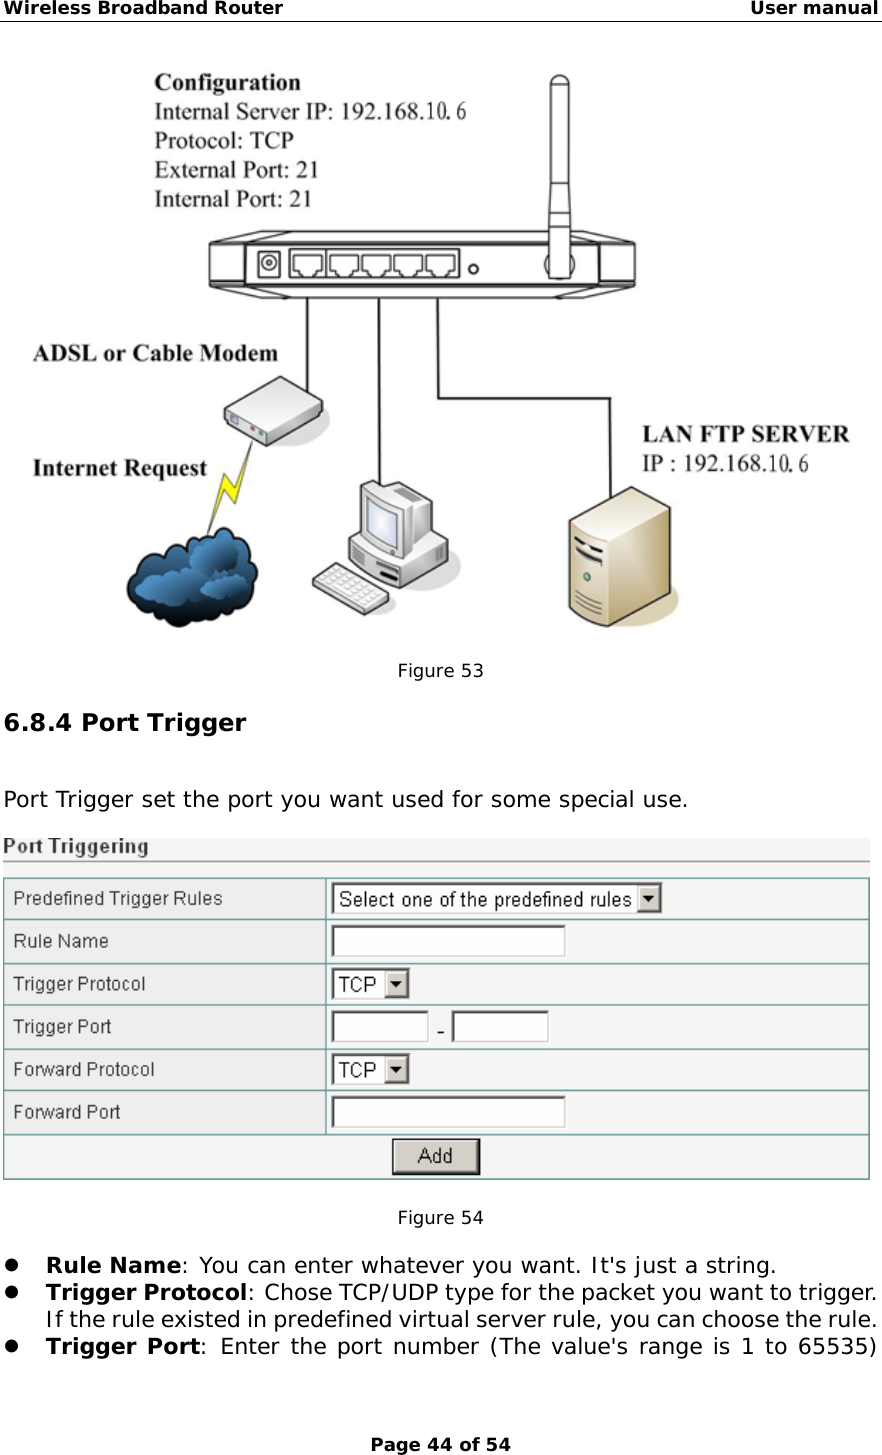 Wireless Broadband Router                                                   User manual Page 44 of 54   Figure 53  6.8.4 Port Trigger Port Trigger set the port you want used for some special use.    Figure 54  z Rule Name: You can enter whatever you want. It&apos;s just a string. z Trigger Protocol: Chose TCP/UDP type for the packet you want to trigger.   If the rule existed in predefined virtual server rule, you can choose the rule. z Trigger Port: Enter the port number (The value&apos;s range is 1 to 65535) 